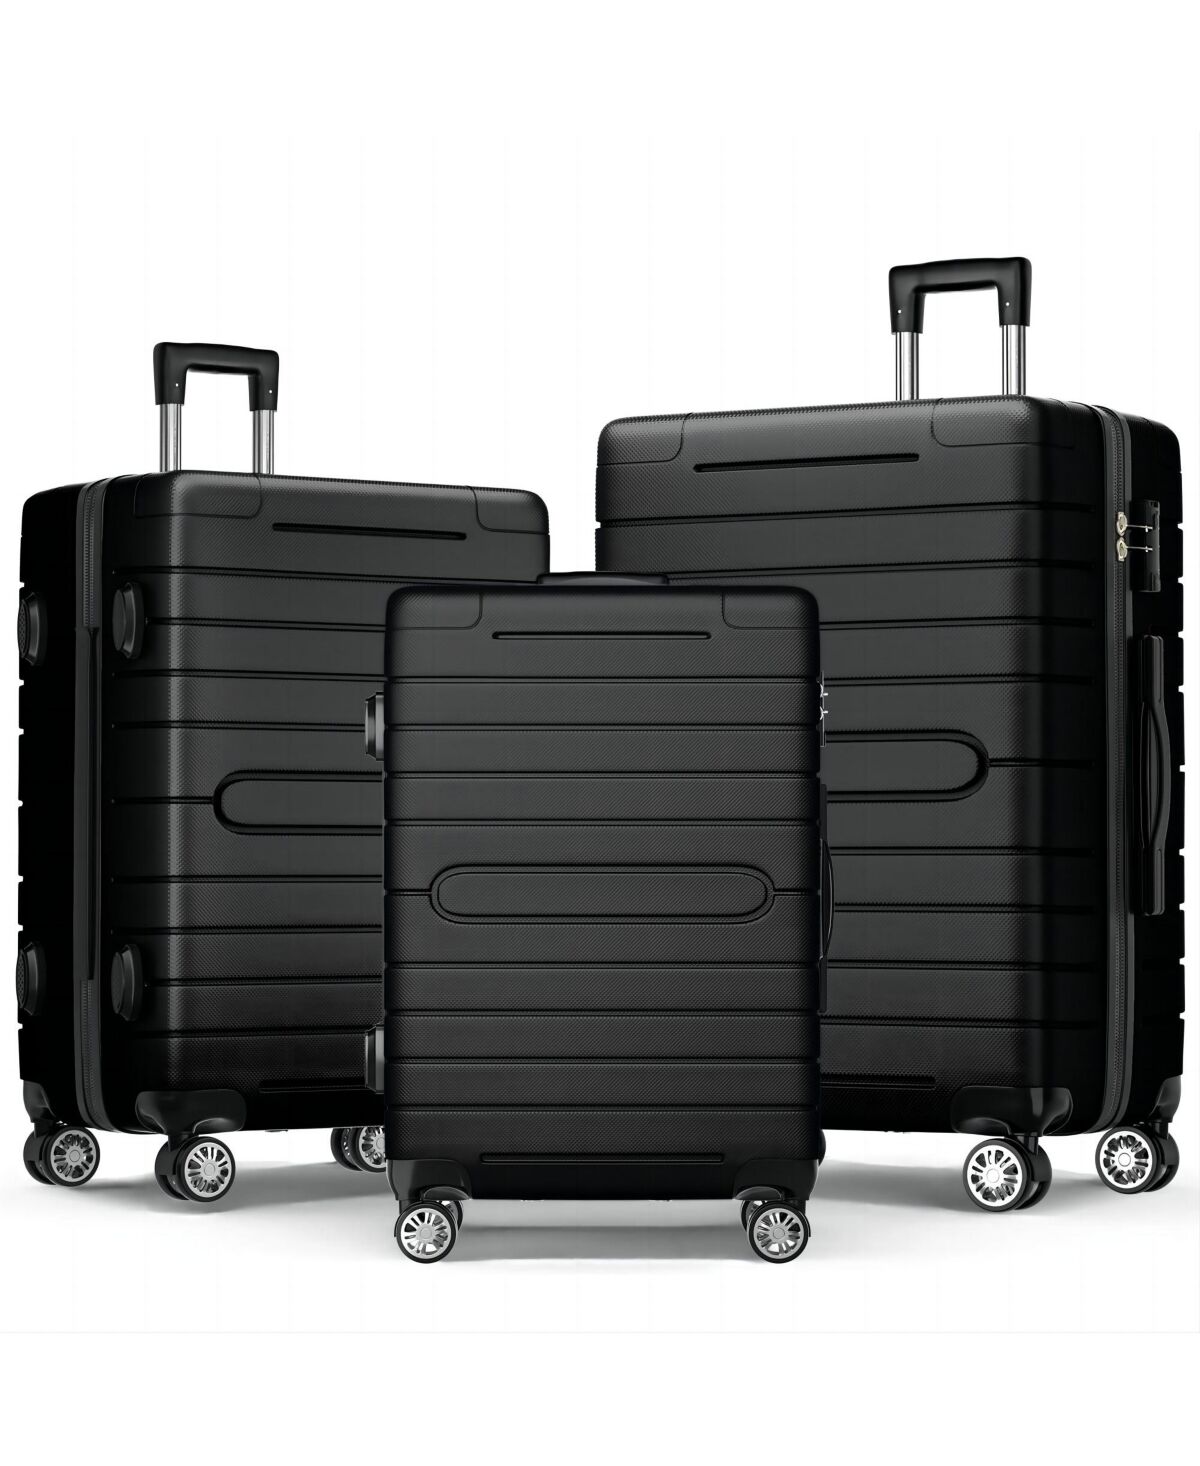 Sugift 3 Piece Luggage Set, Hard side Lightweight Suitcase Carry with Spinner Wheels & Tsa Lock, 20in/24in/28in - Black